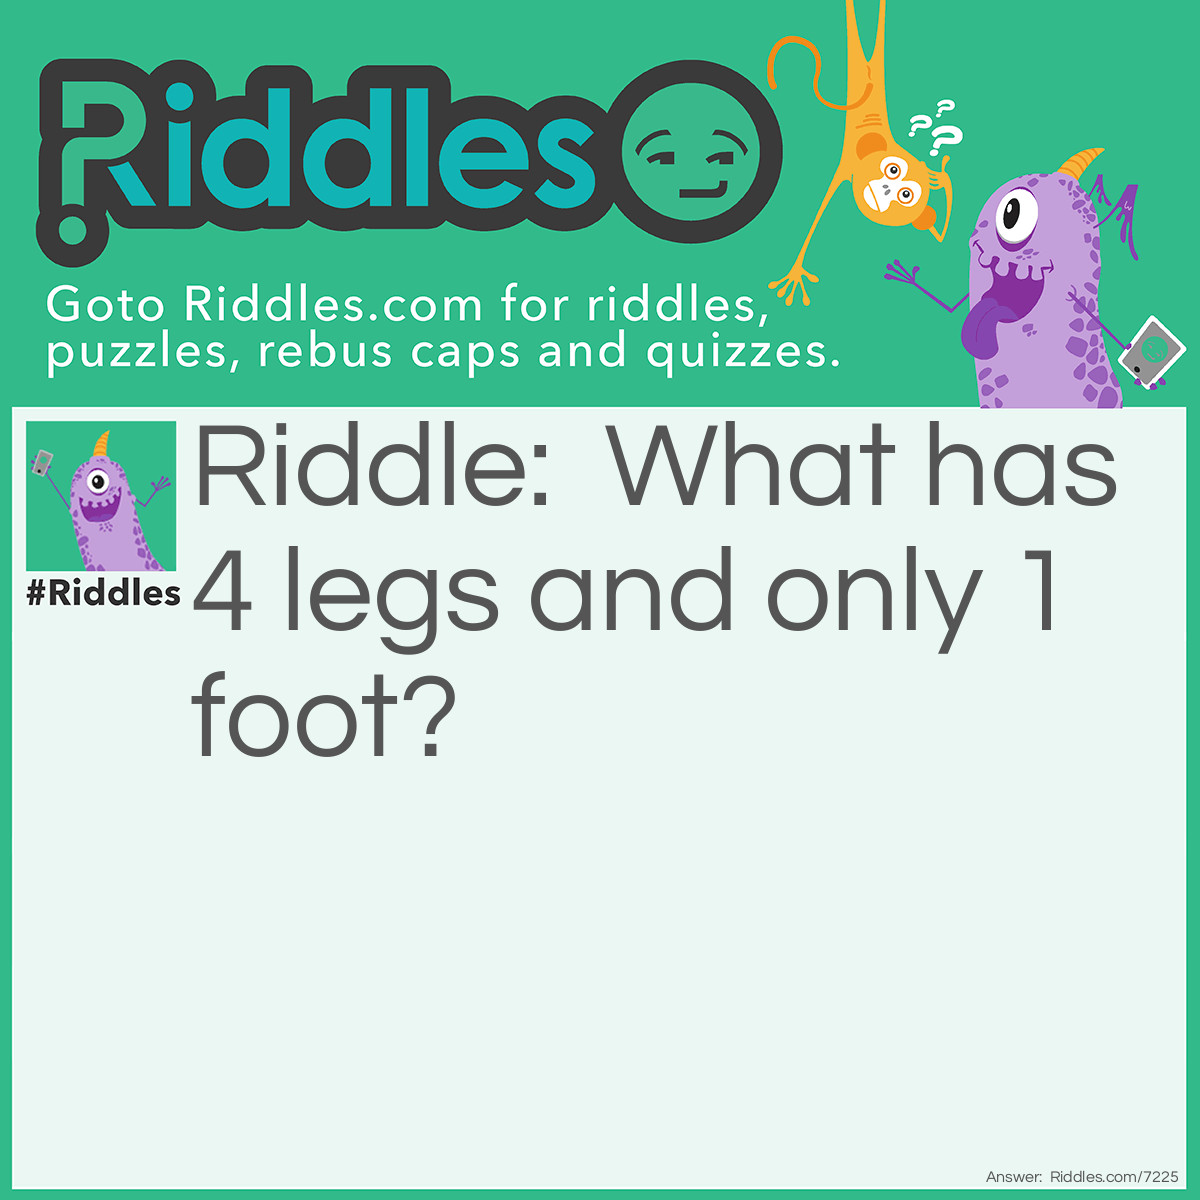 Riddle: What has 4 legs and only 1 foot? Answer: A Bed.